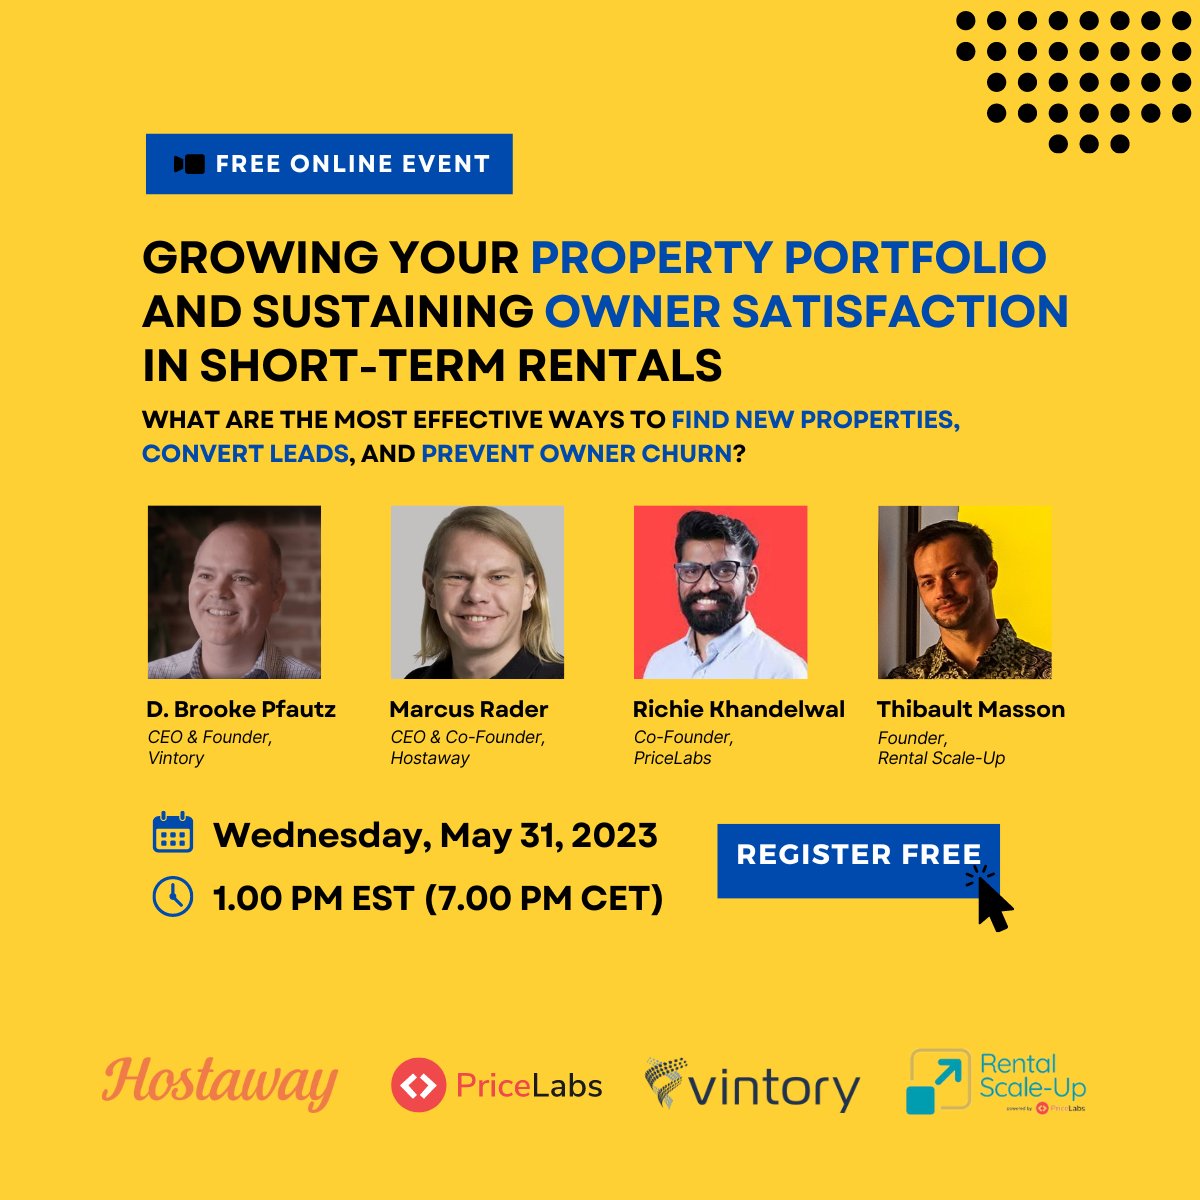 🚀 Boost your property portfolio & owner relations with our FREE webinar today! Learn how to find new owners and keep them, and network with fellow #propertymanagers.

🕒 Less than 6 hours away!
💻 Register: rentalscaleup.com/grow-property-… @VintoryHQ @Hostaway @Price_Labs